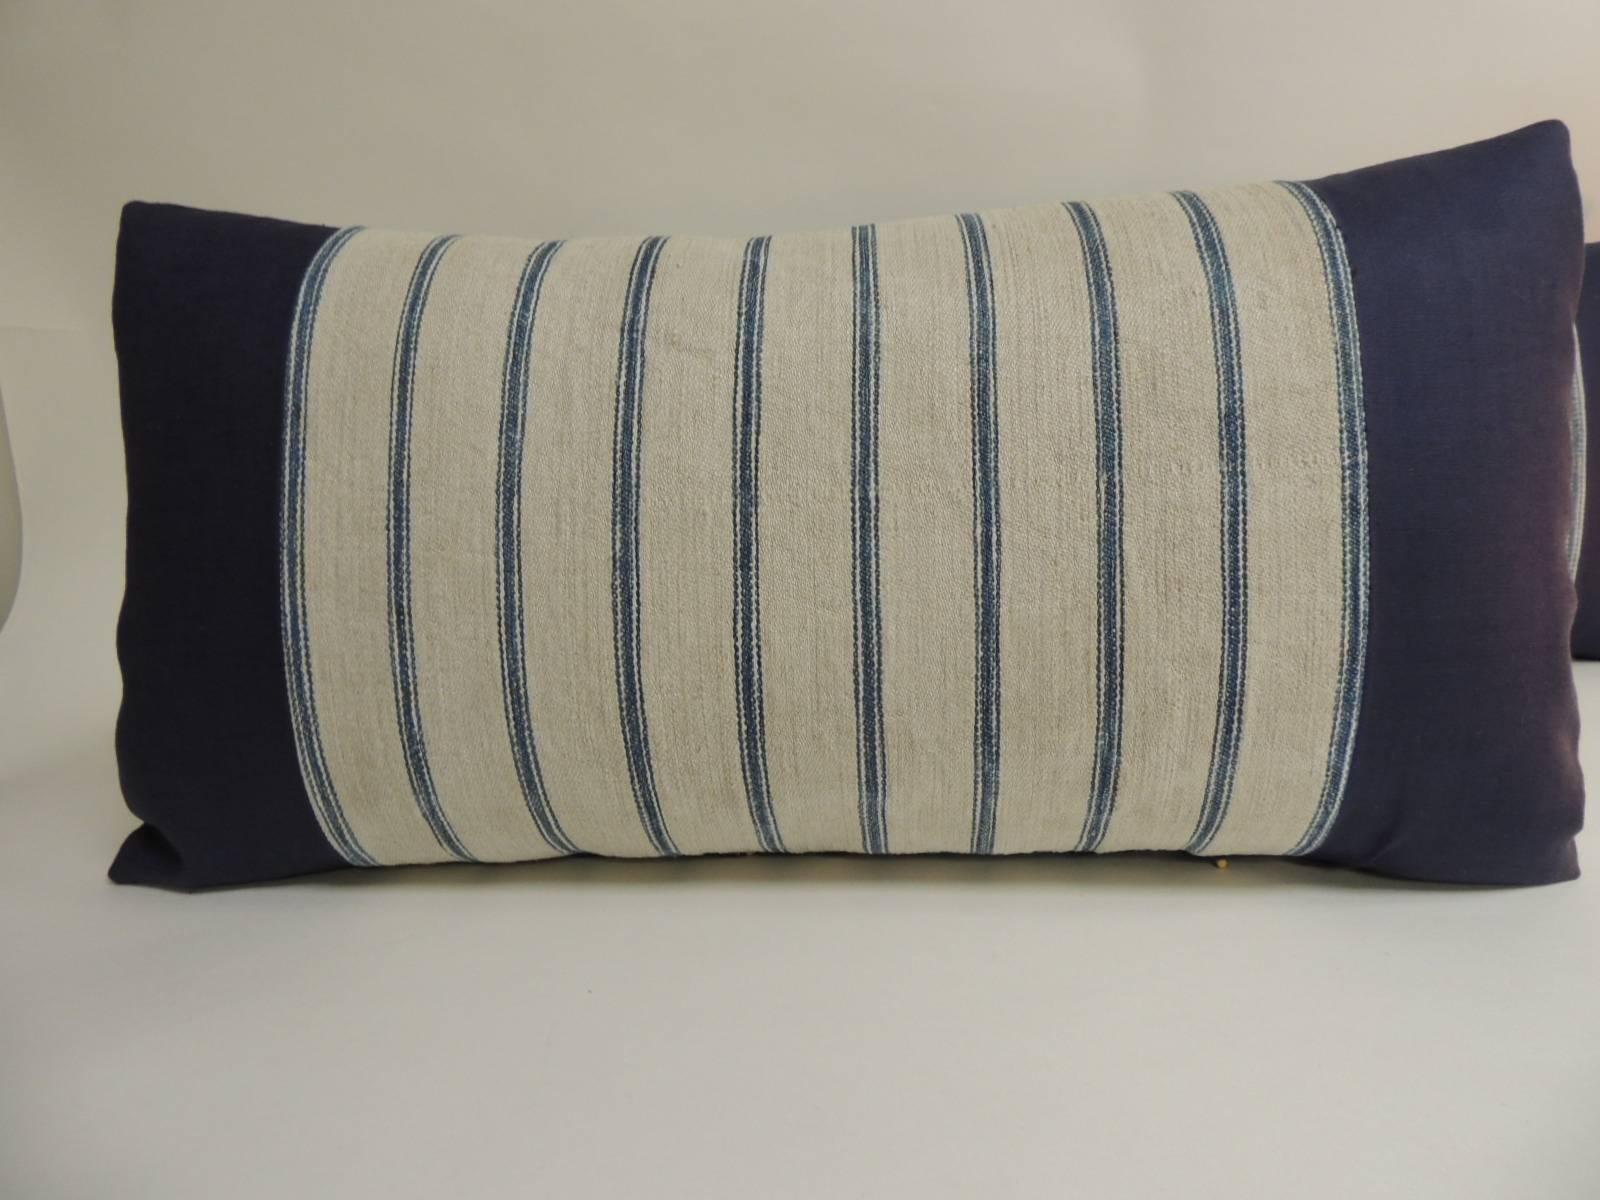 Pair of French Grain Sack ticking stripes textile on natural and blue long bolster decorative pillows
framed and backing with navy blue linen. Accent bolster pillow handcrafted and designed in the USA. Throw pillow with custom-made pillow inserts